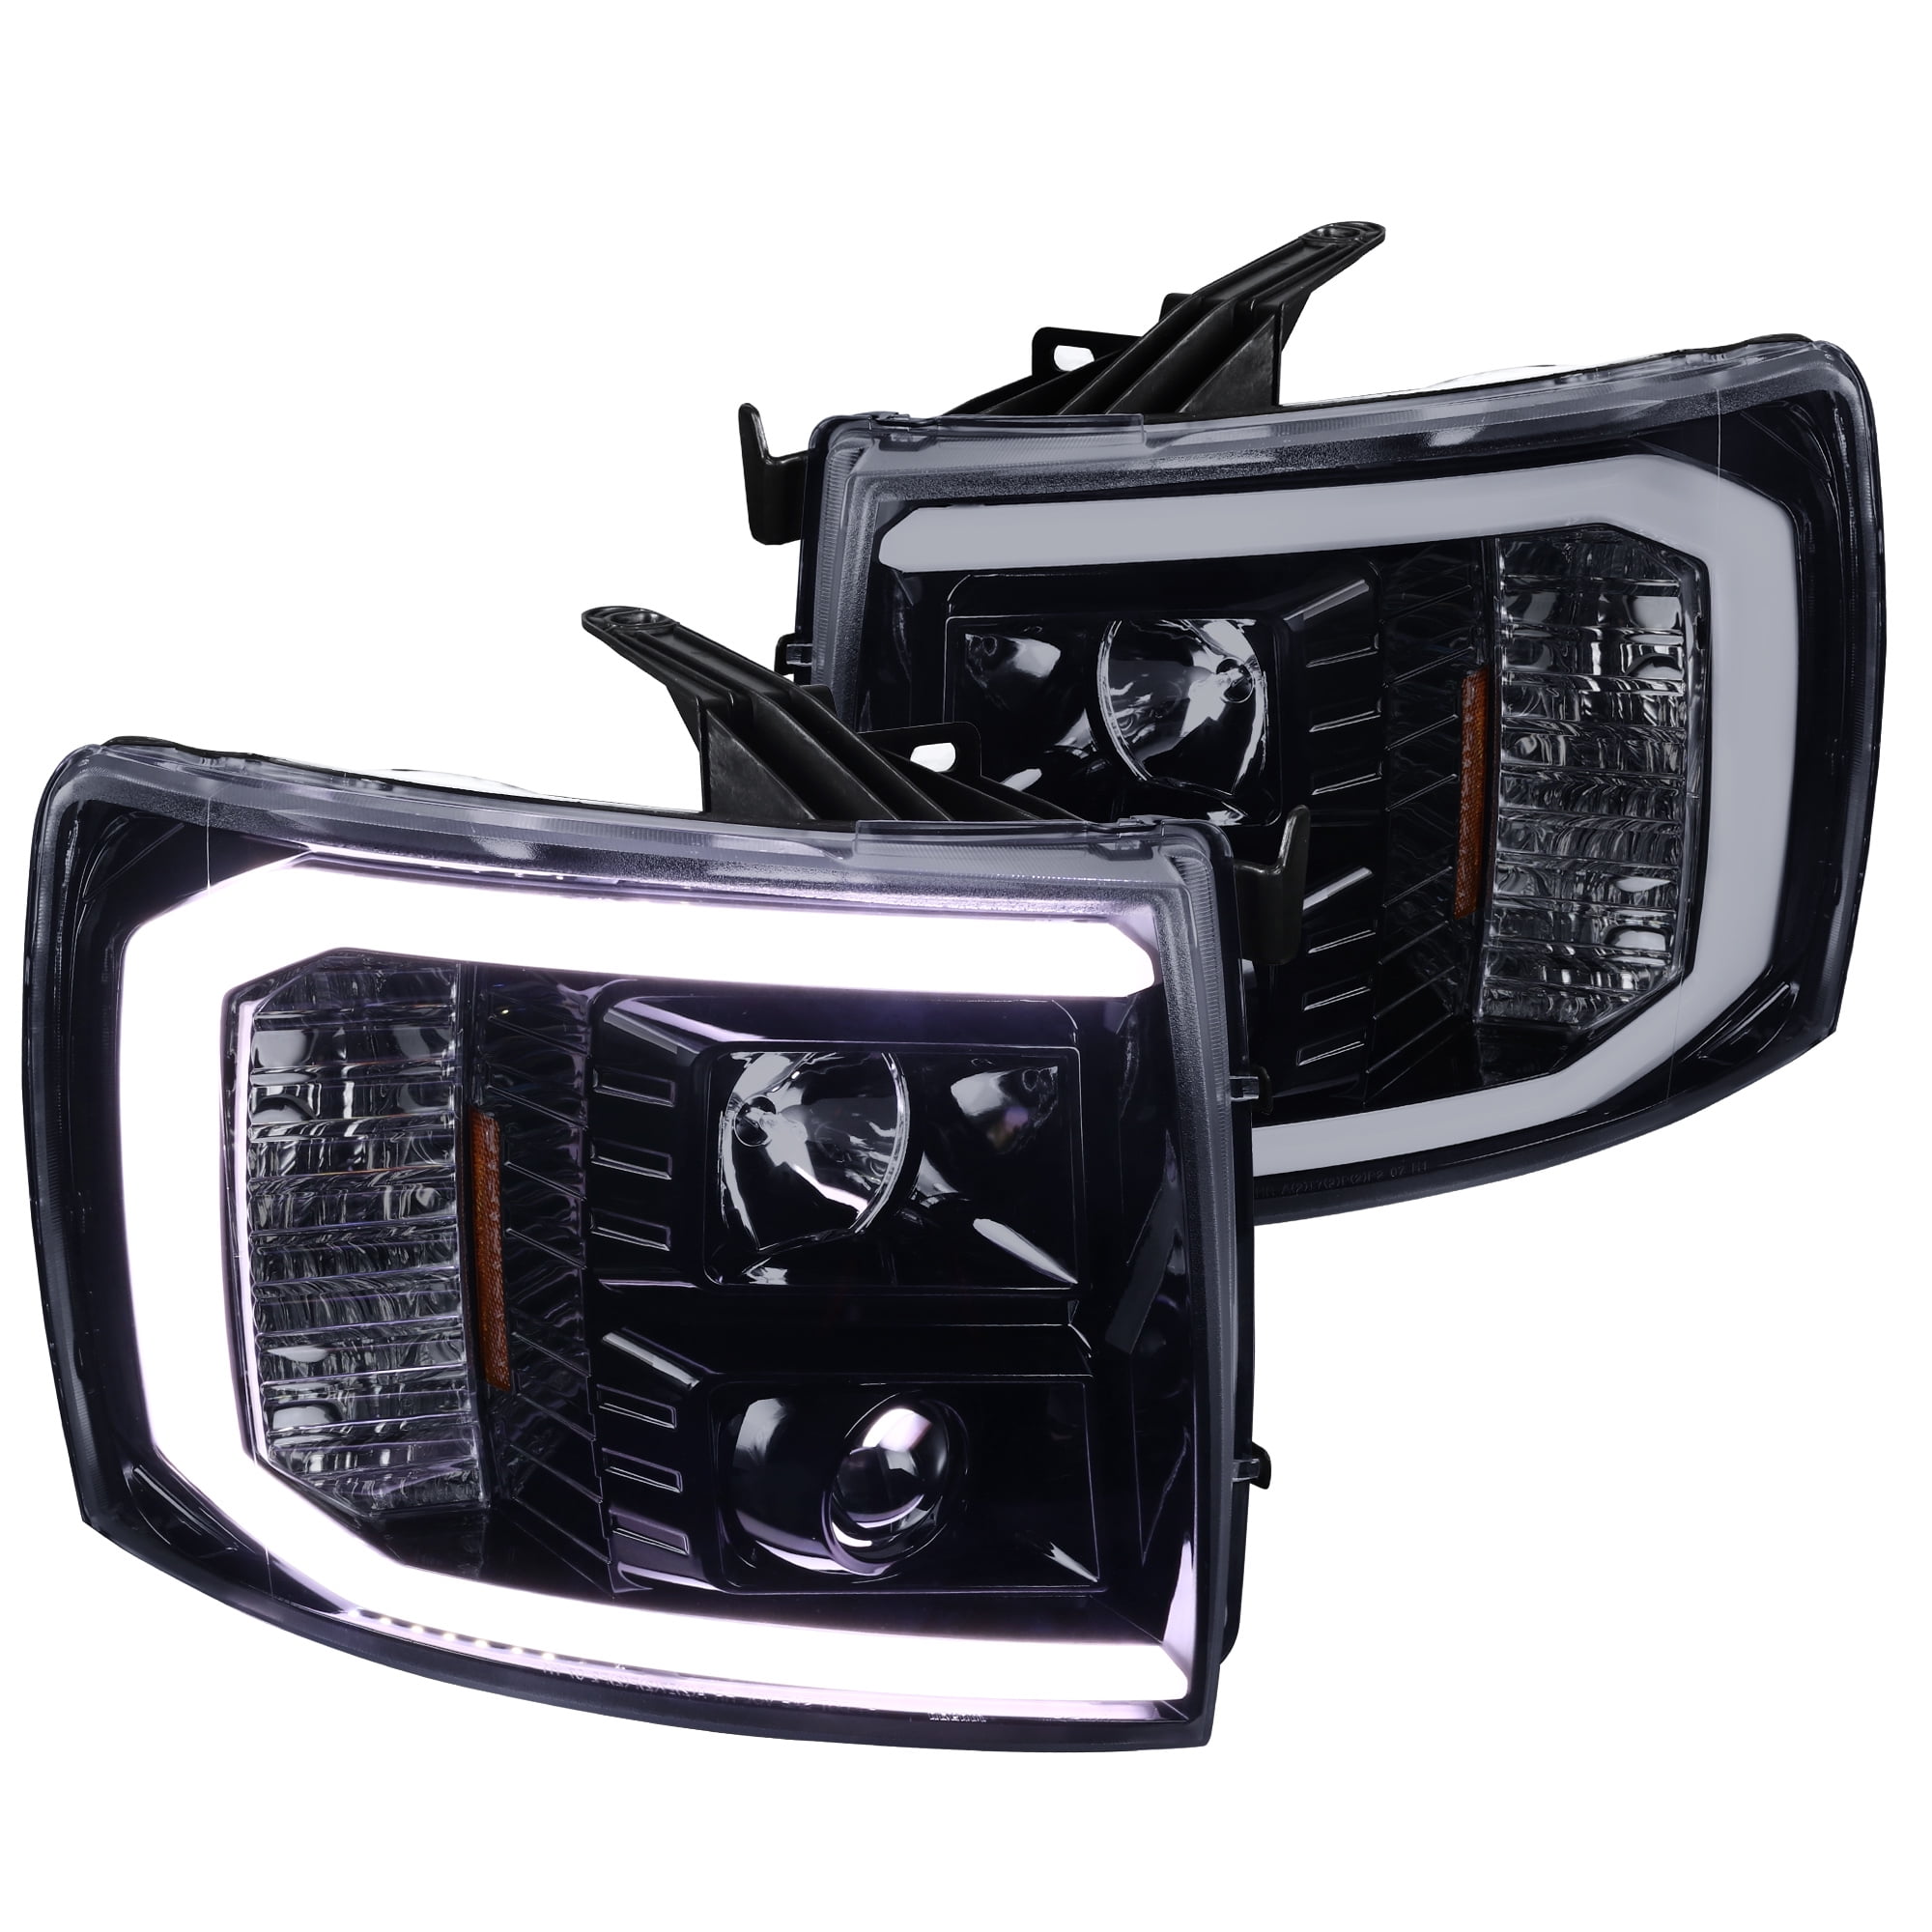 Spec-D Tuning For 2007-2014 Chevy Silverado Pickup Glossy Black LED DRL Projector Headlights Led Headlight Bulbs For 2011 Chevy Silverado